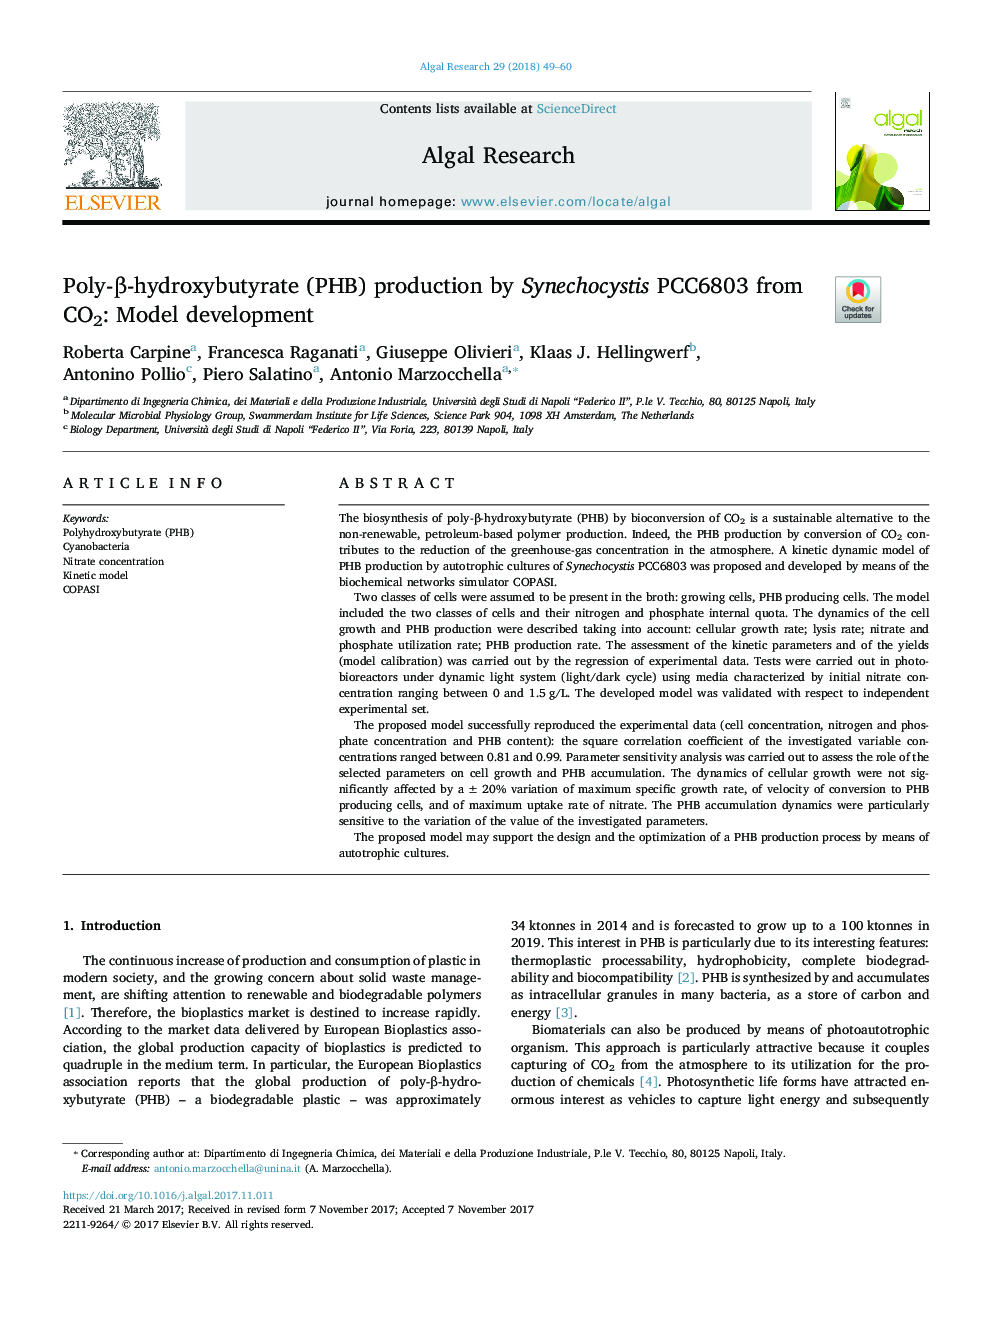 Poly-Î²-hydroxybutyrate (PHB) production by Synechocystis PCC6803 from CO2: Model development